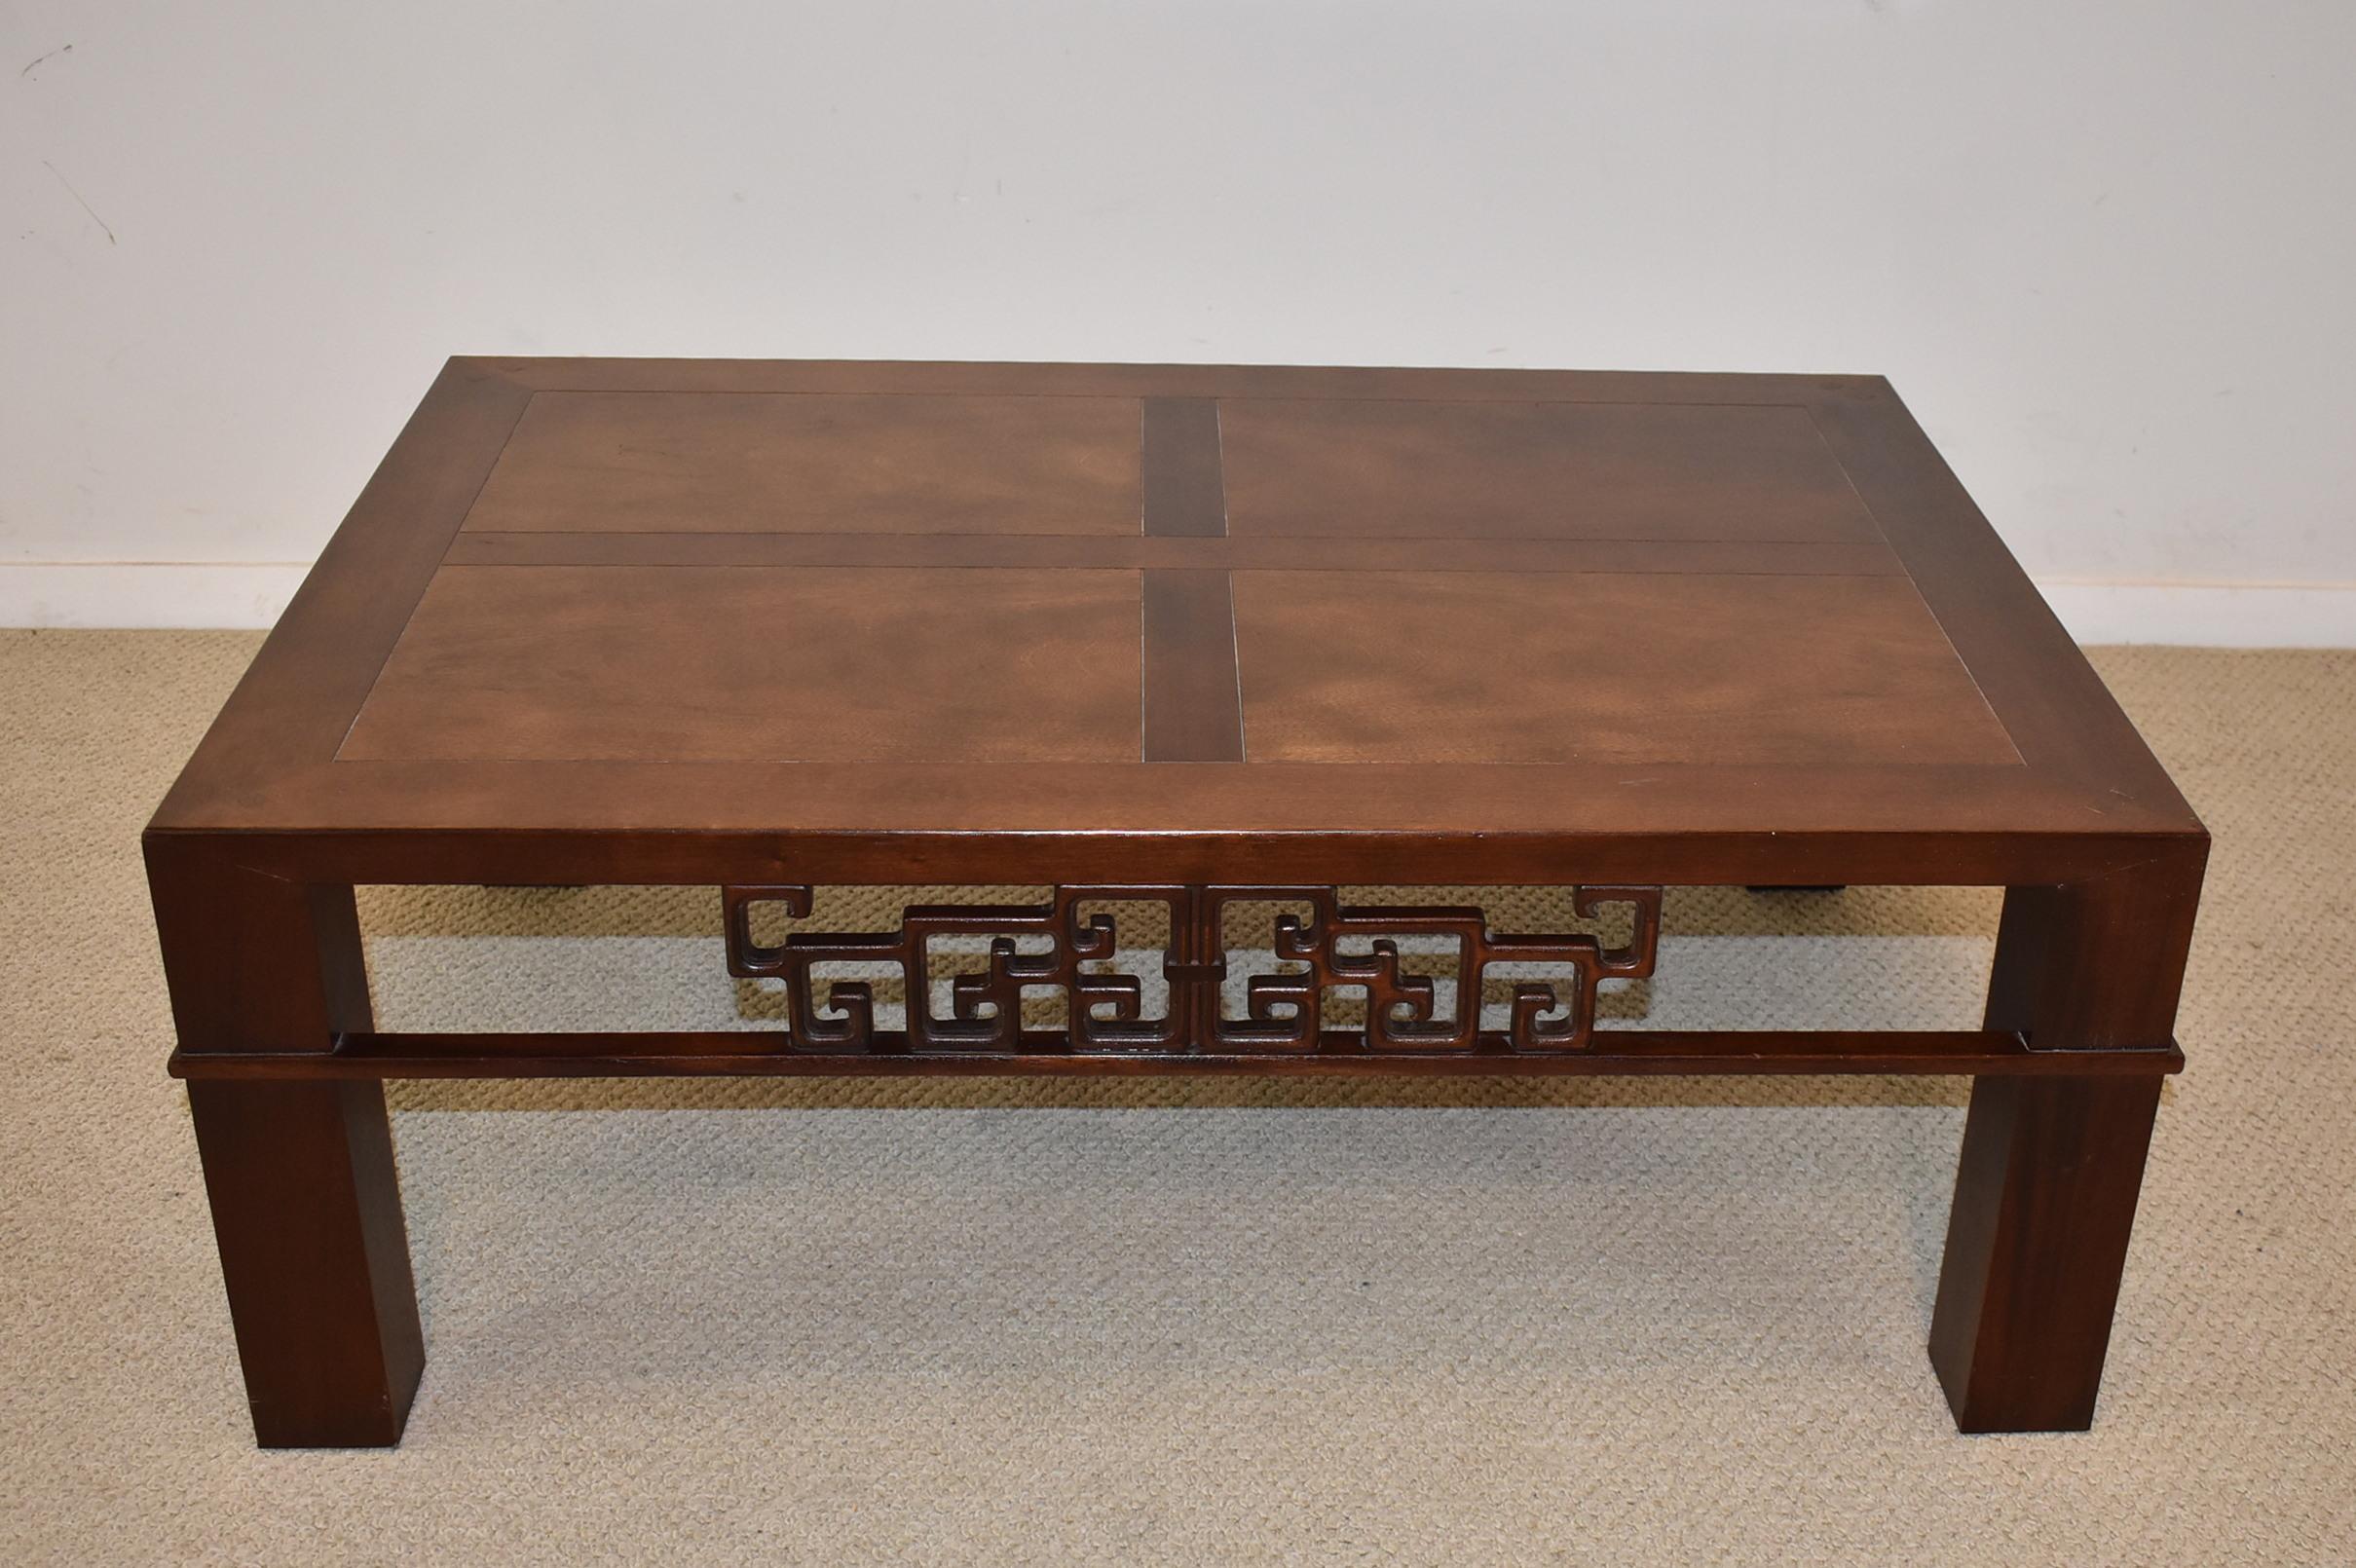 Asian style walnut coffee table by Baker Furniture. Decorative carved openwork side details. Very nice condition. Dimensions: 28.5